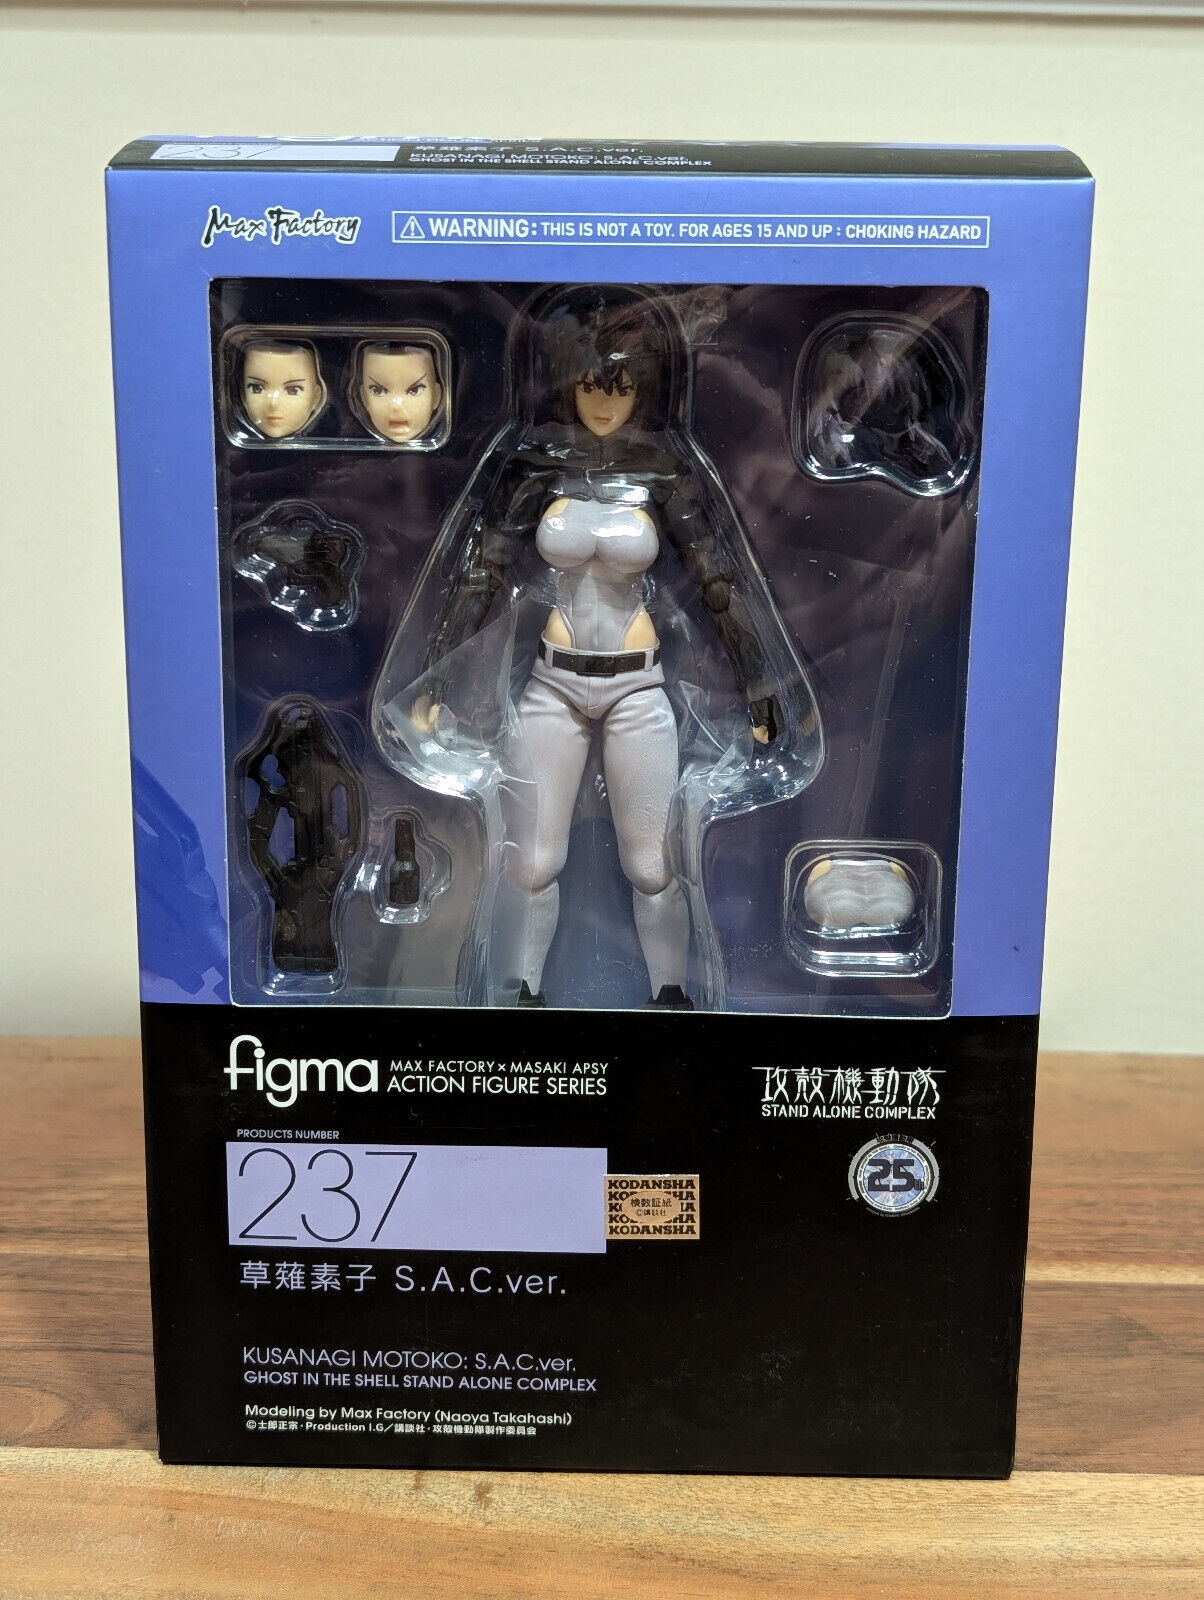 Figma 237 Motoko Kusanagi S.A.C. Ver. Ghost in the Shell Preowned